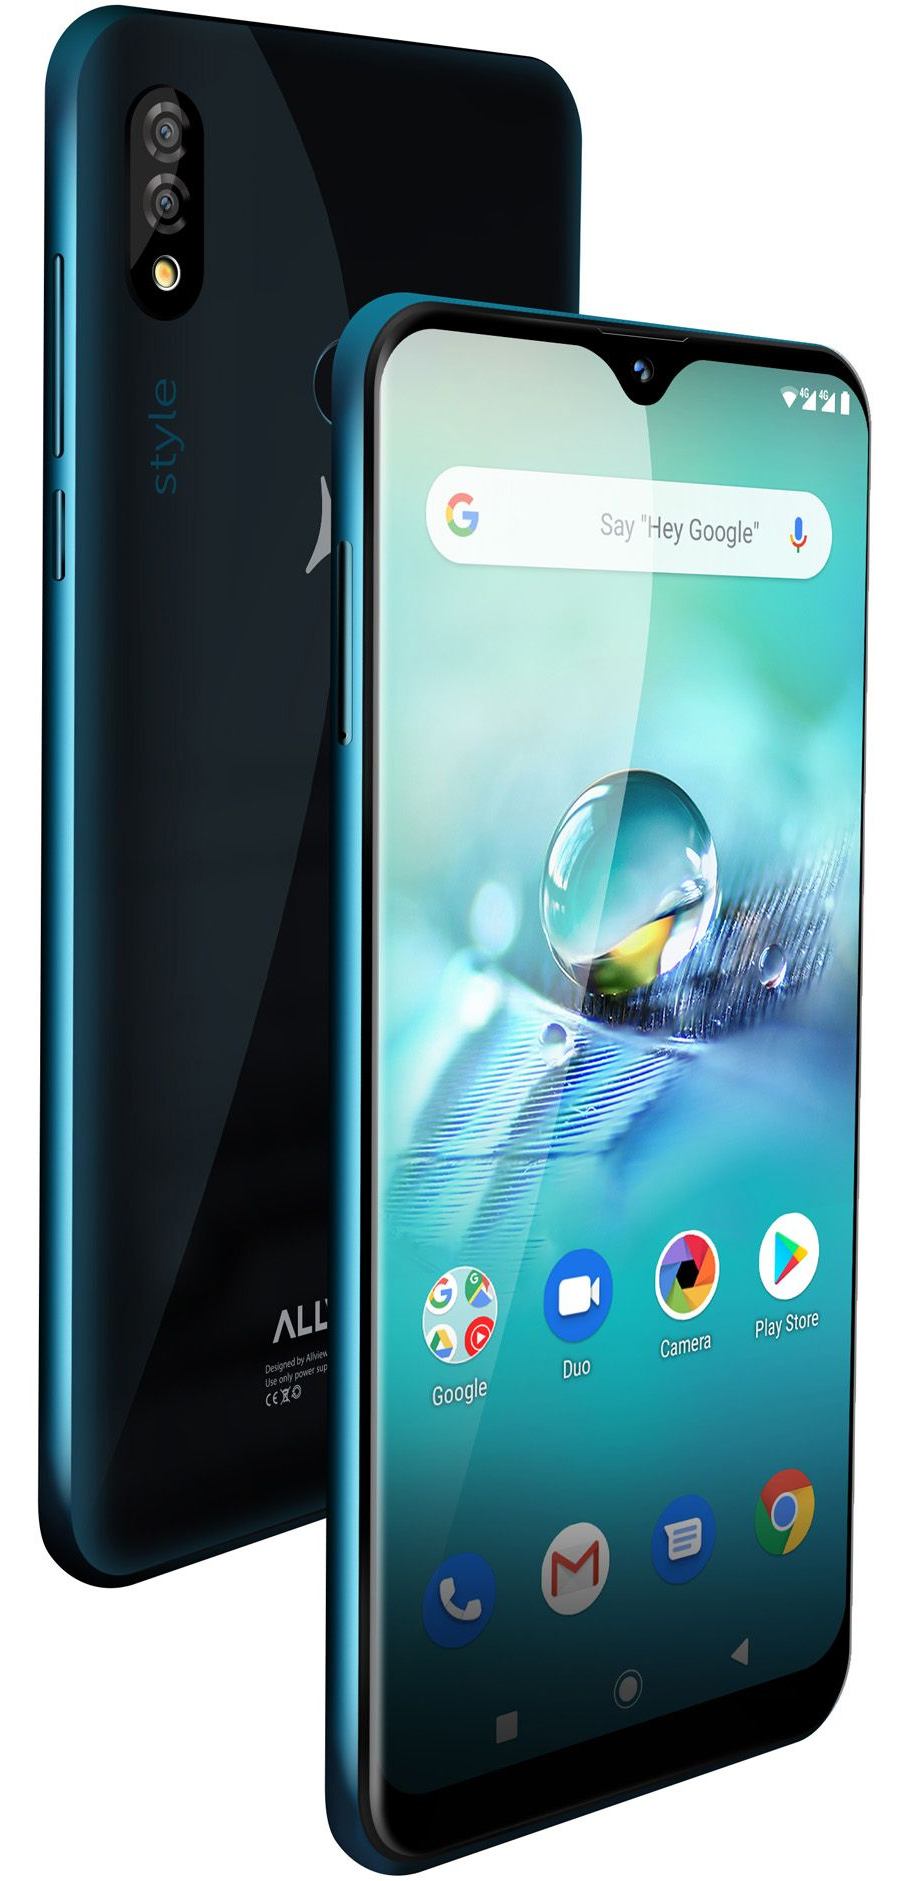 Allview Soul X7 Style